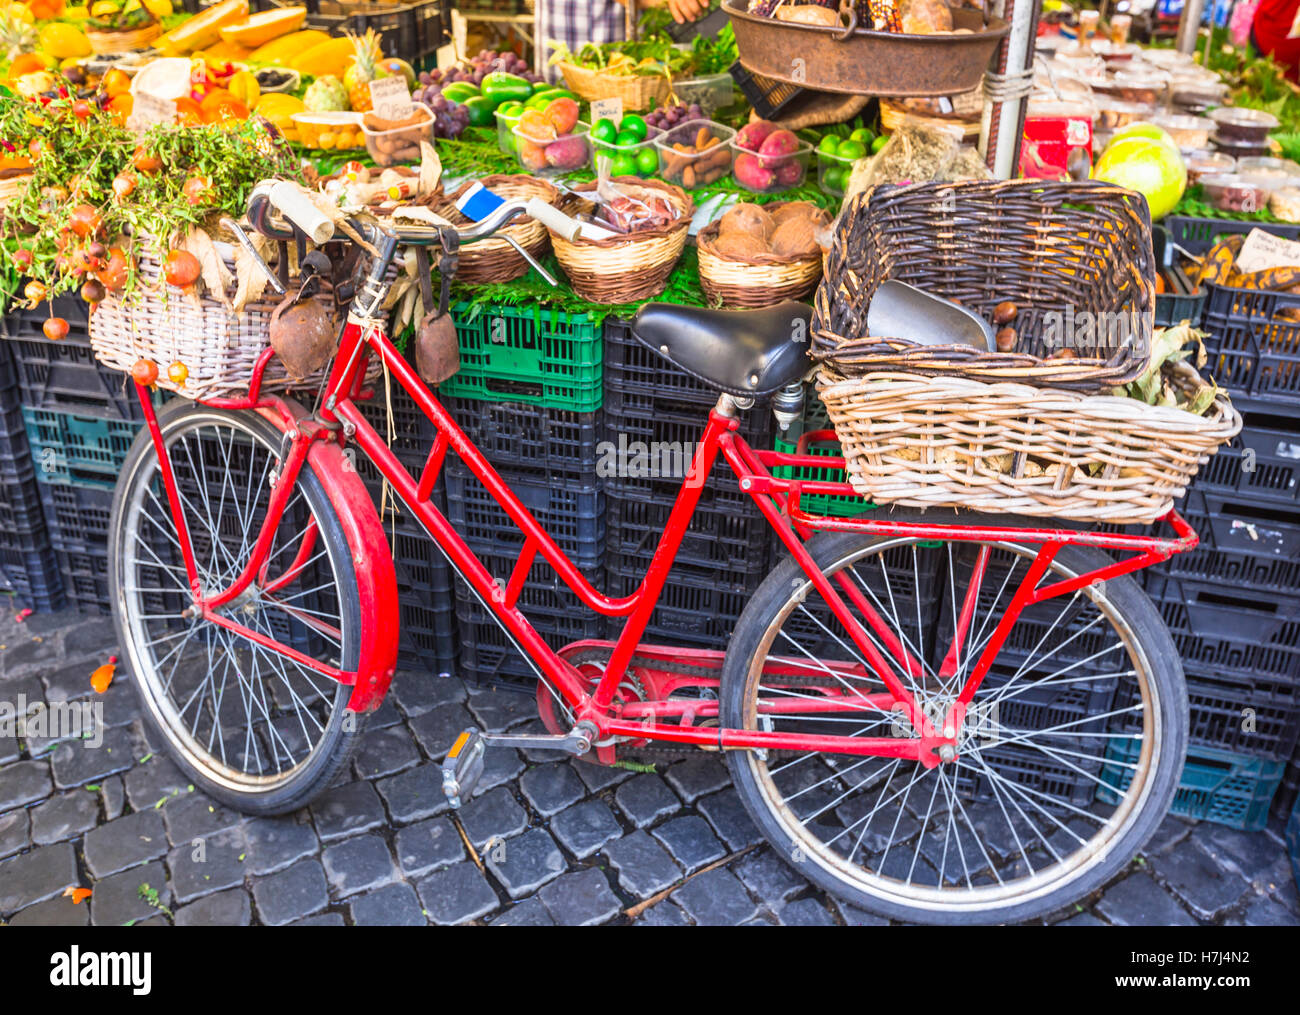 Charming market' still life with old bike with baskets. 'Campo di Fiori' in Rome Stock Photo